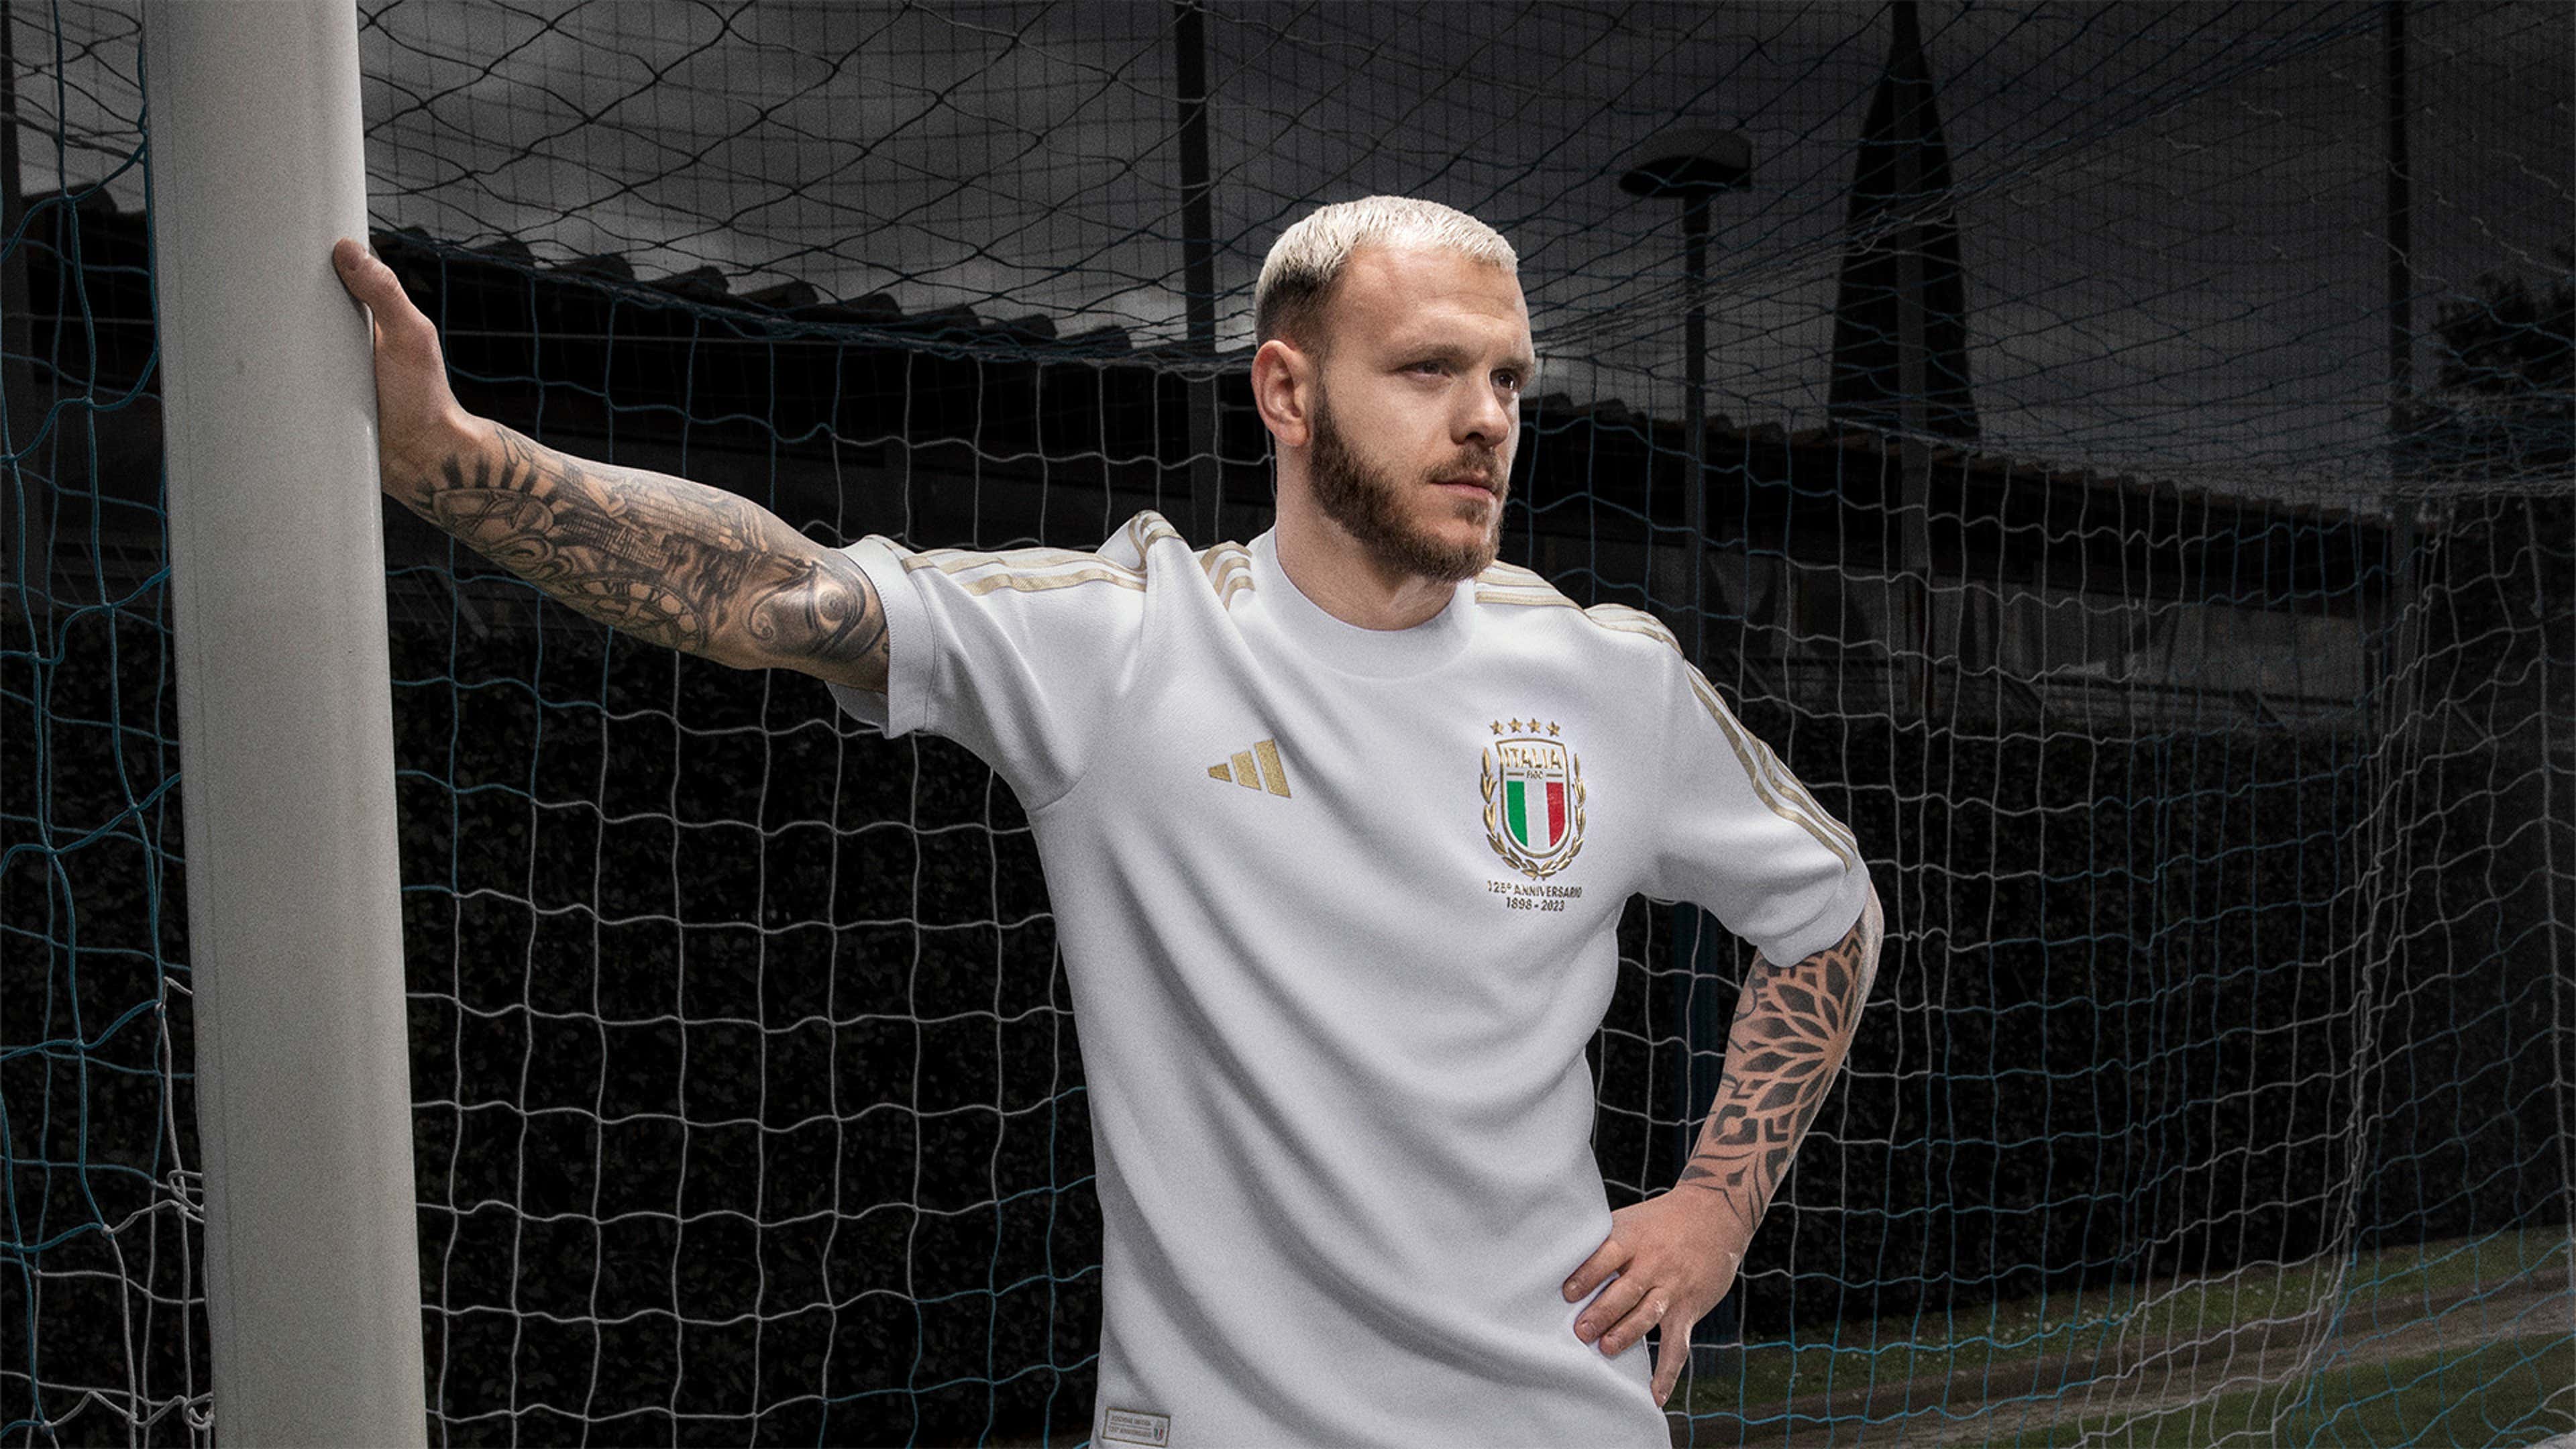 adidas release 125th anniversary Italy kit